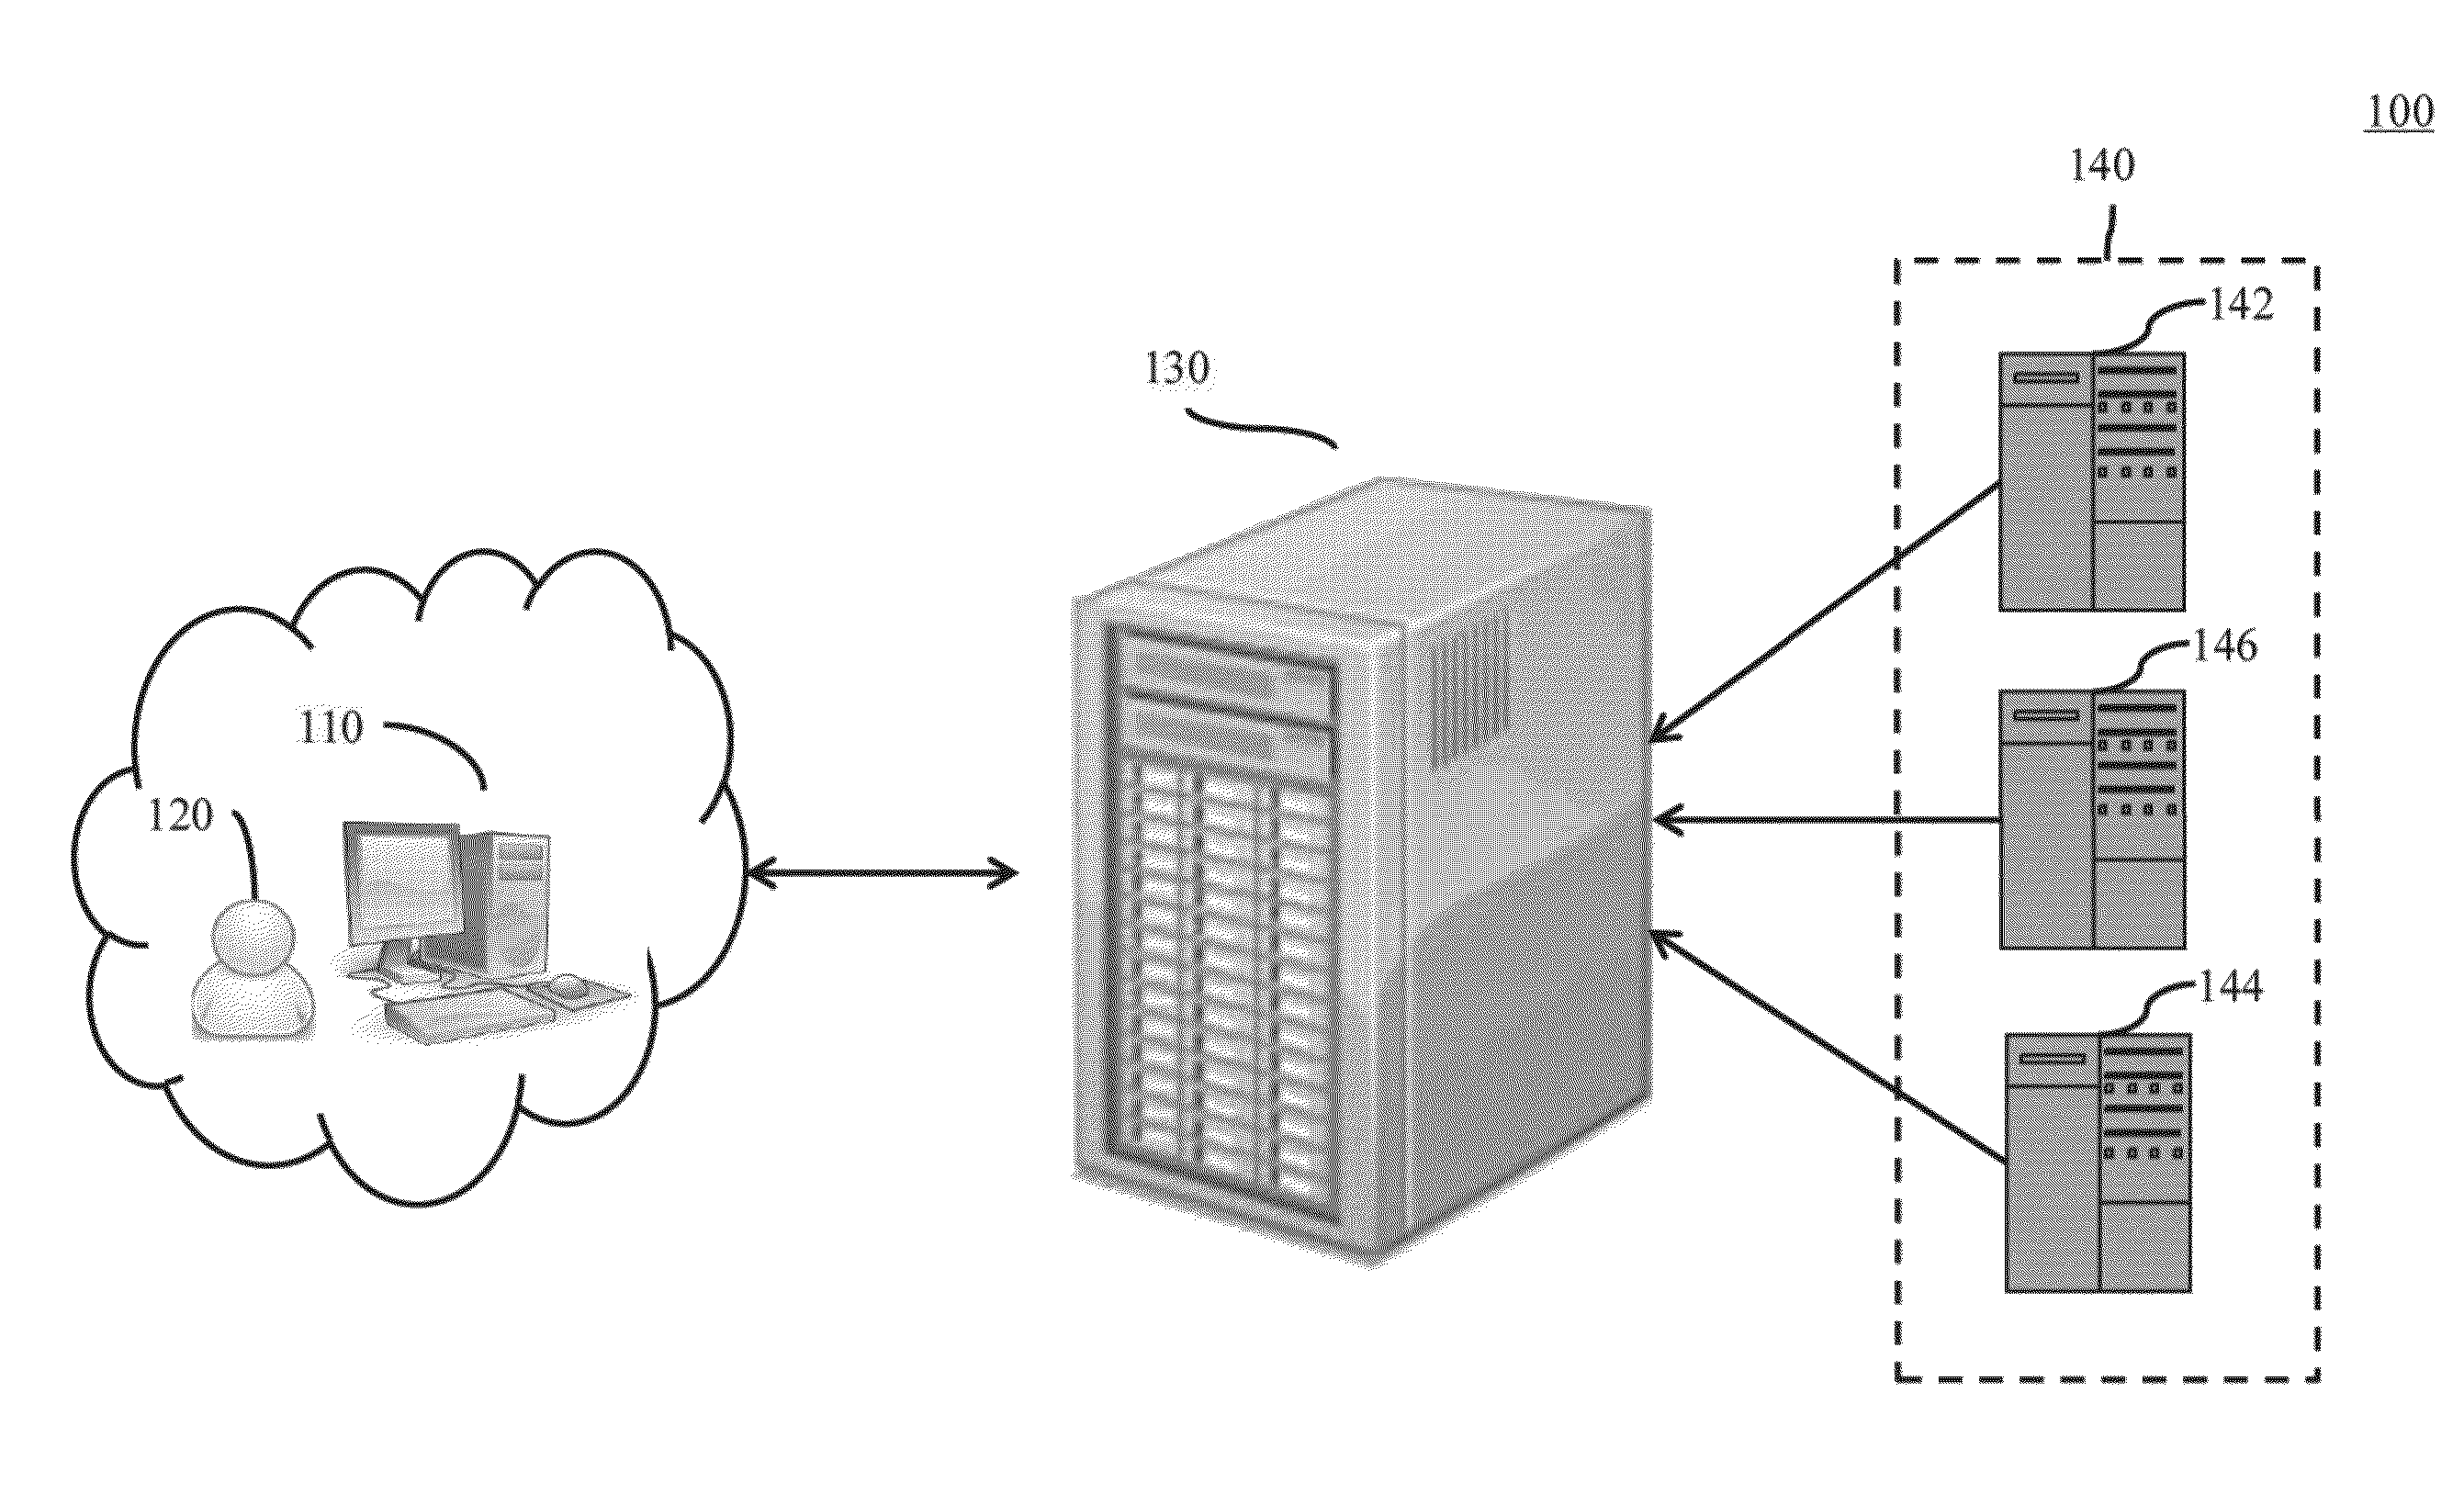 System and Method for Caching Time Series Data